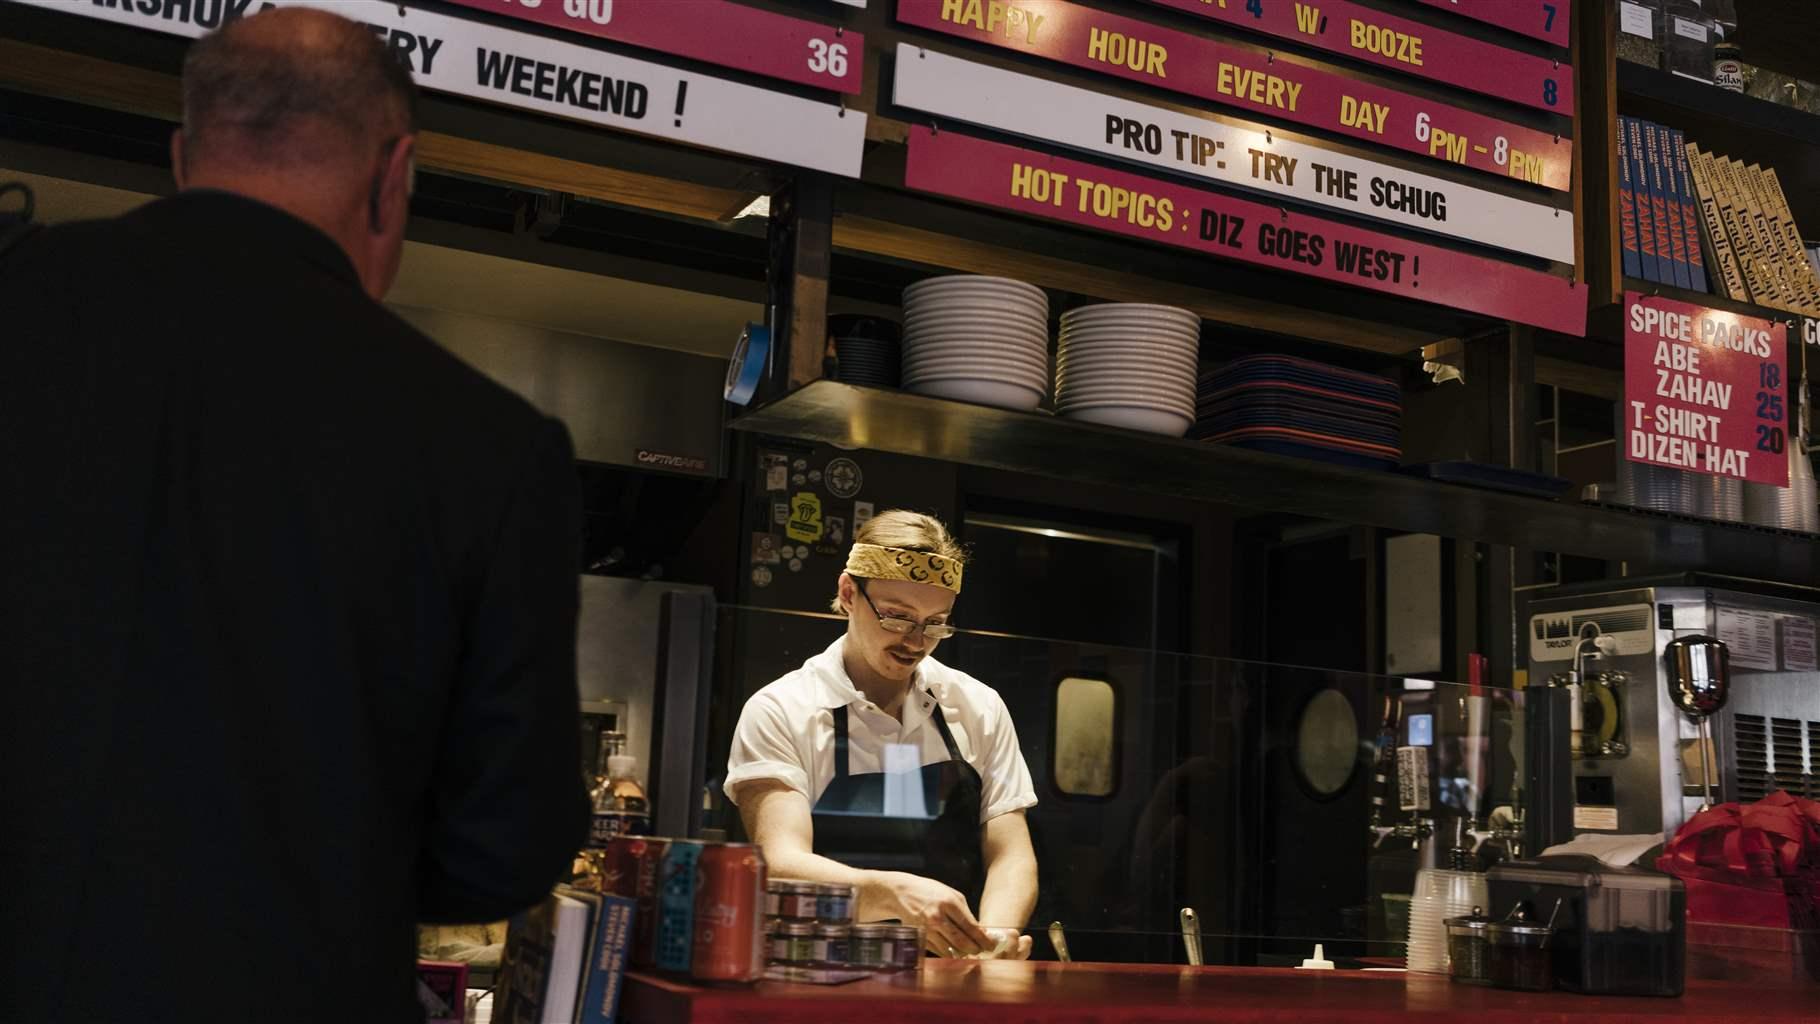 A man behind a counter prepares an order with a customer waiting.